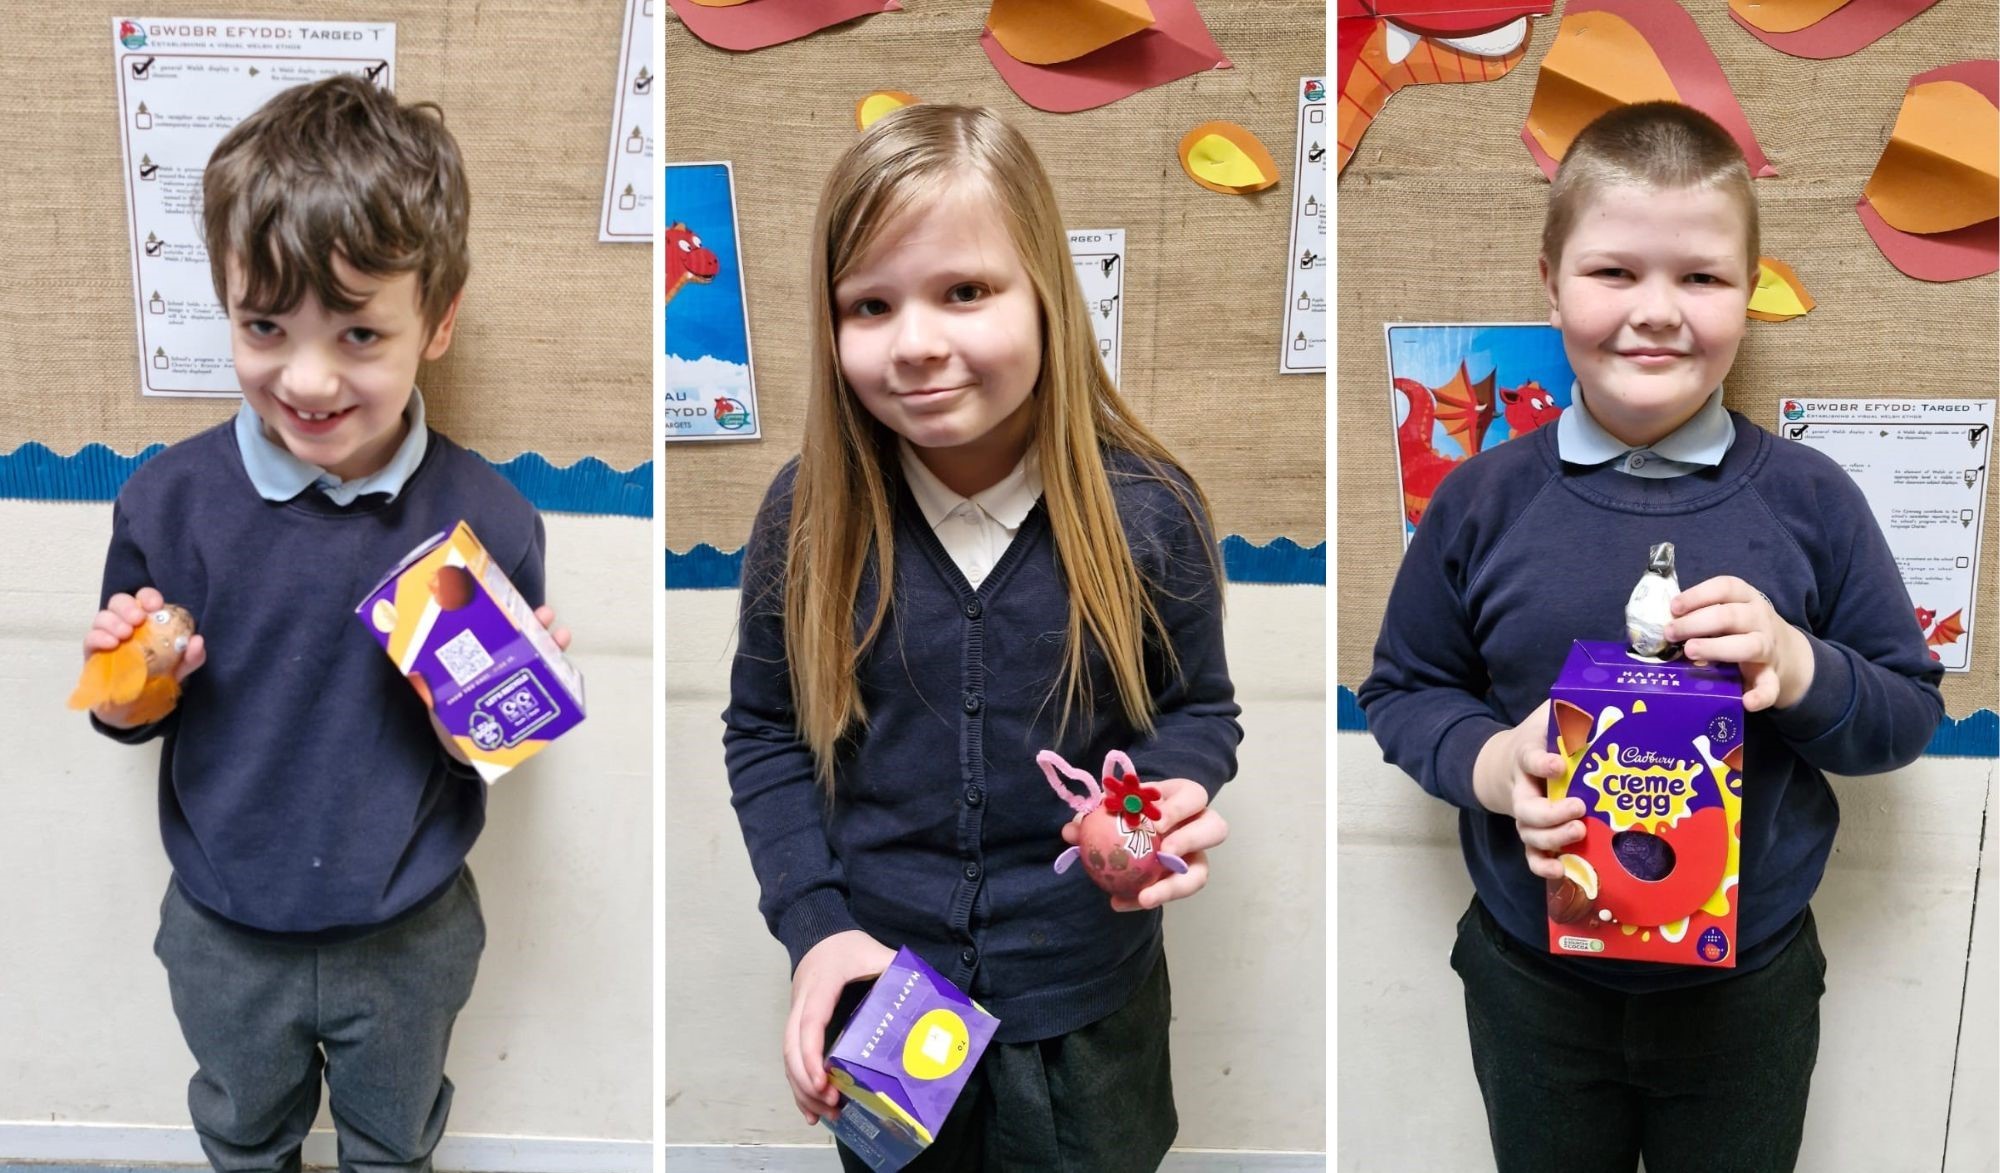 Easter fun with prizes and chocolate at St Ethelwolds School.